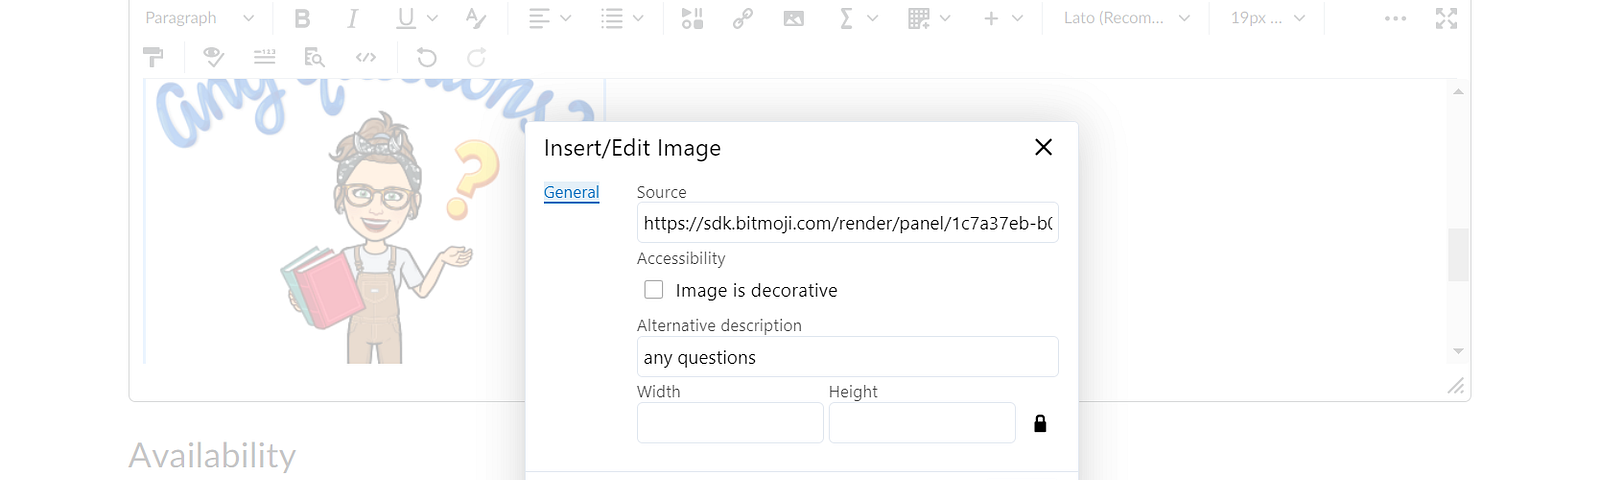 An image that shows how to add alt text or mark an image as decorative in D2L